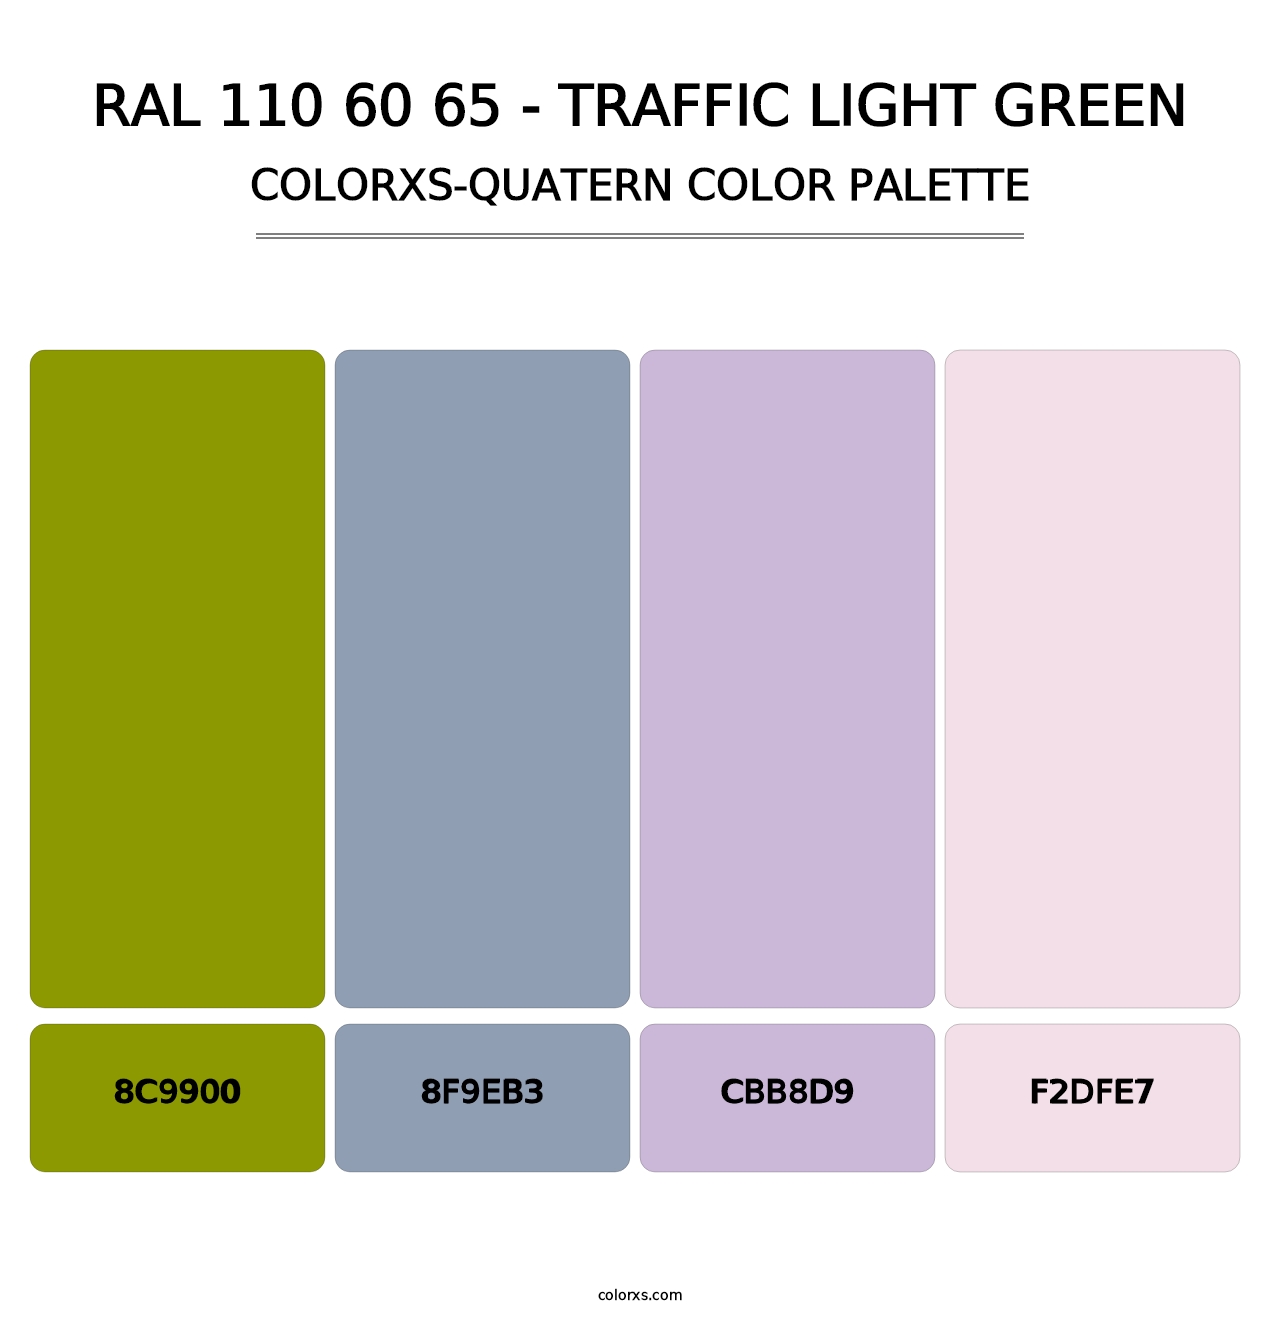 RAL 110 60 65 - Traffic Light Green - Colorxs Quatern Palette